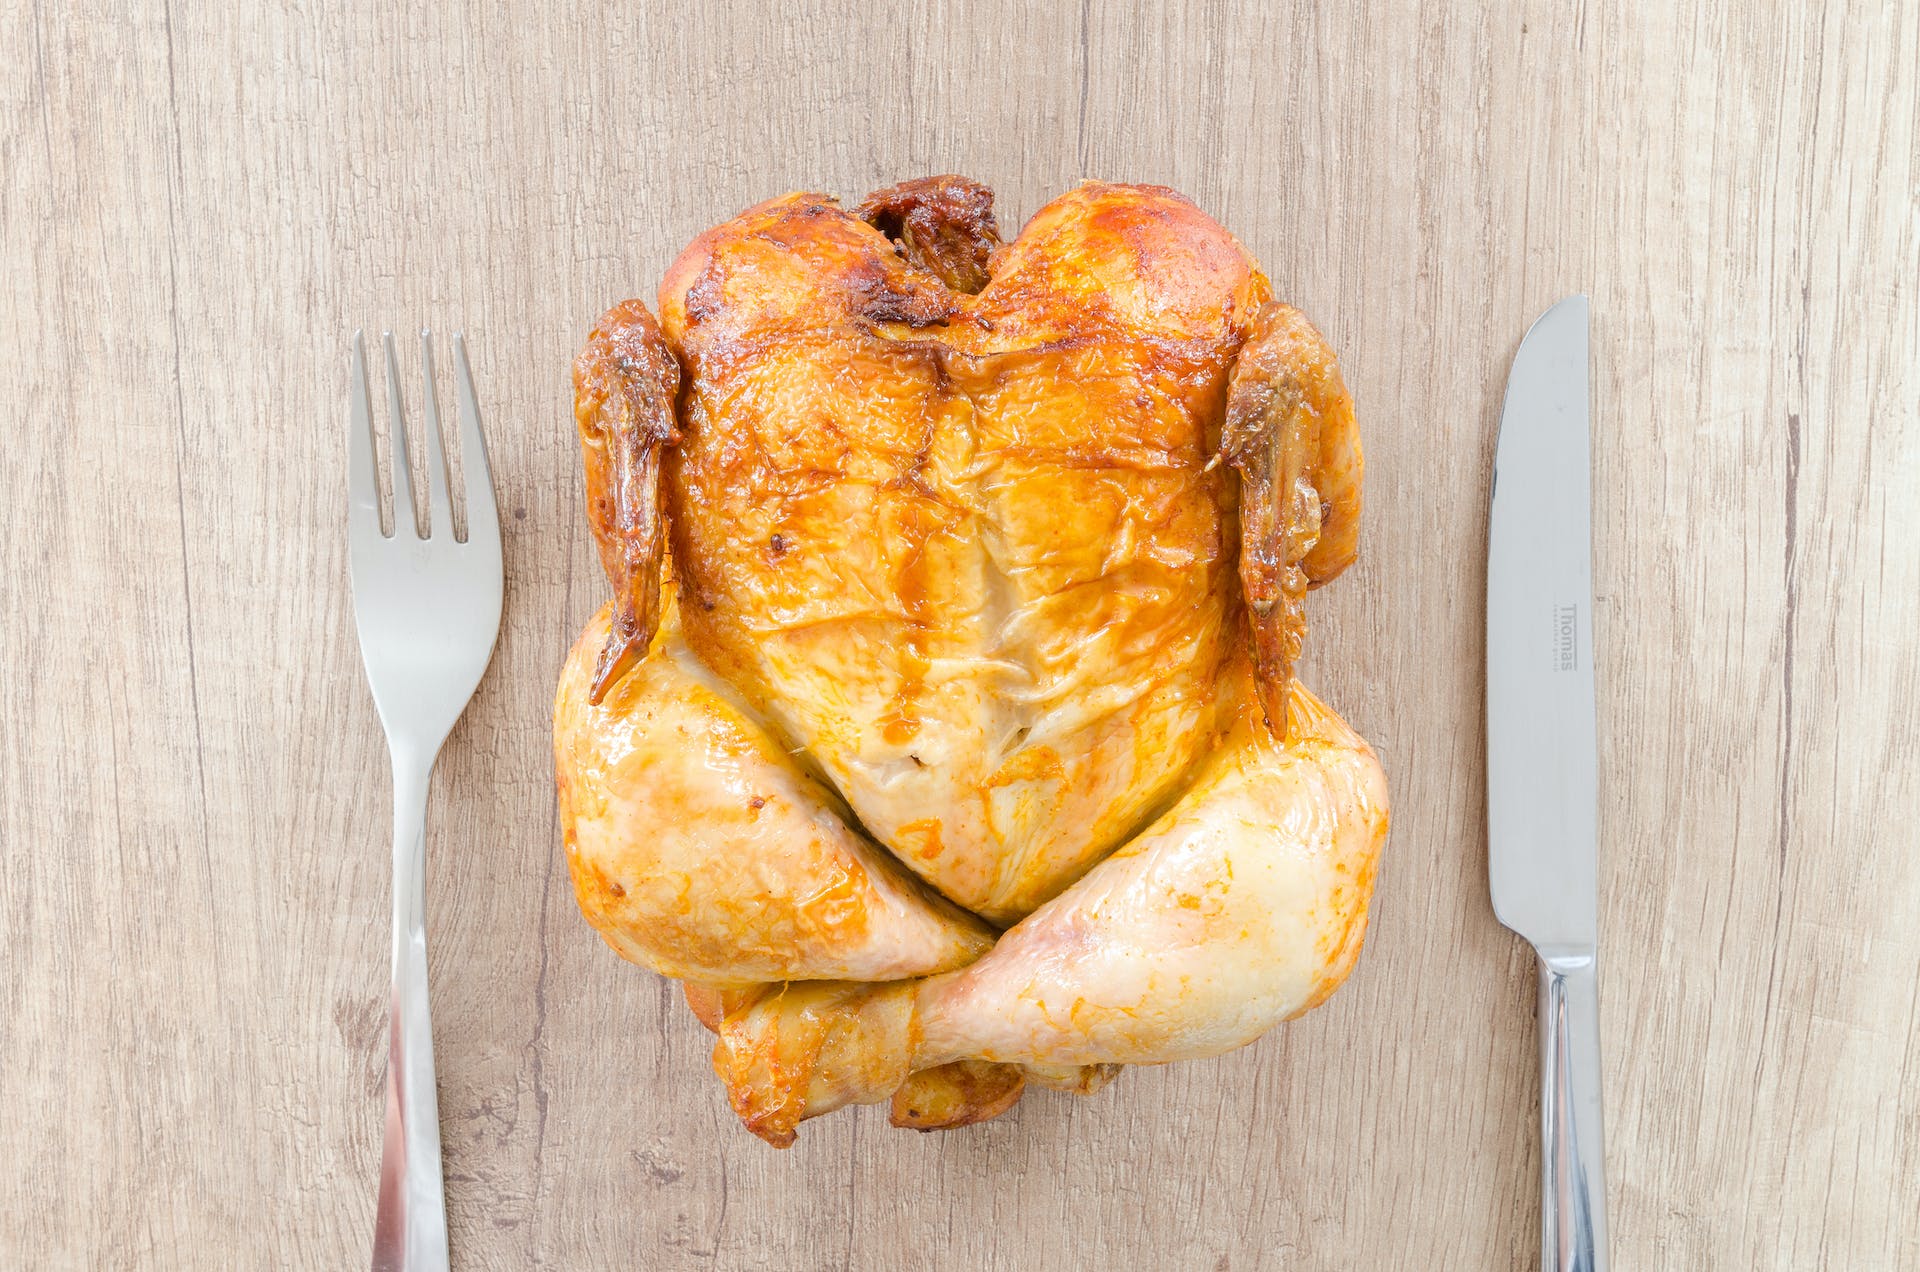 Roasted chicken on a wooden surface | Source: Pexels